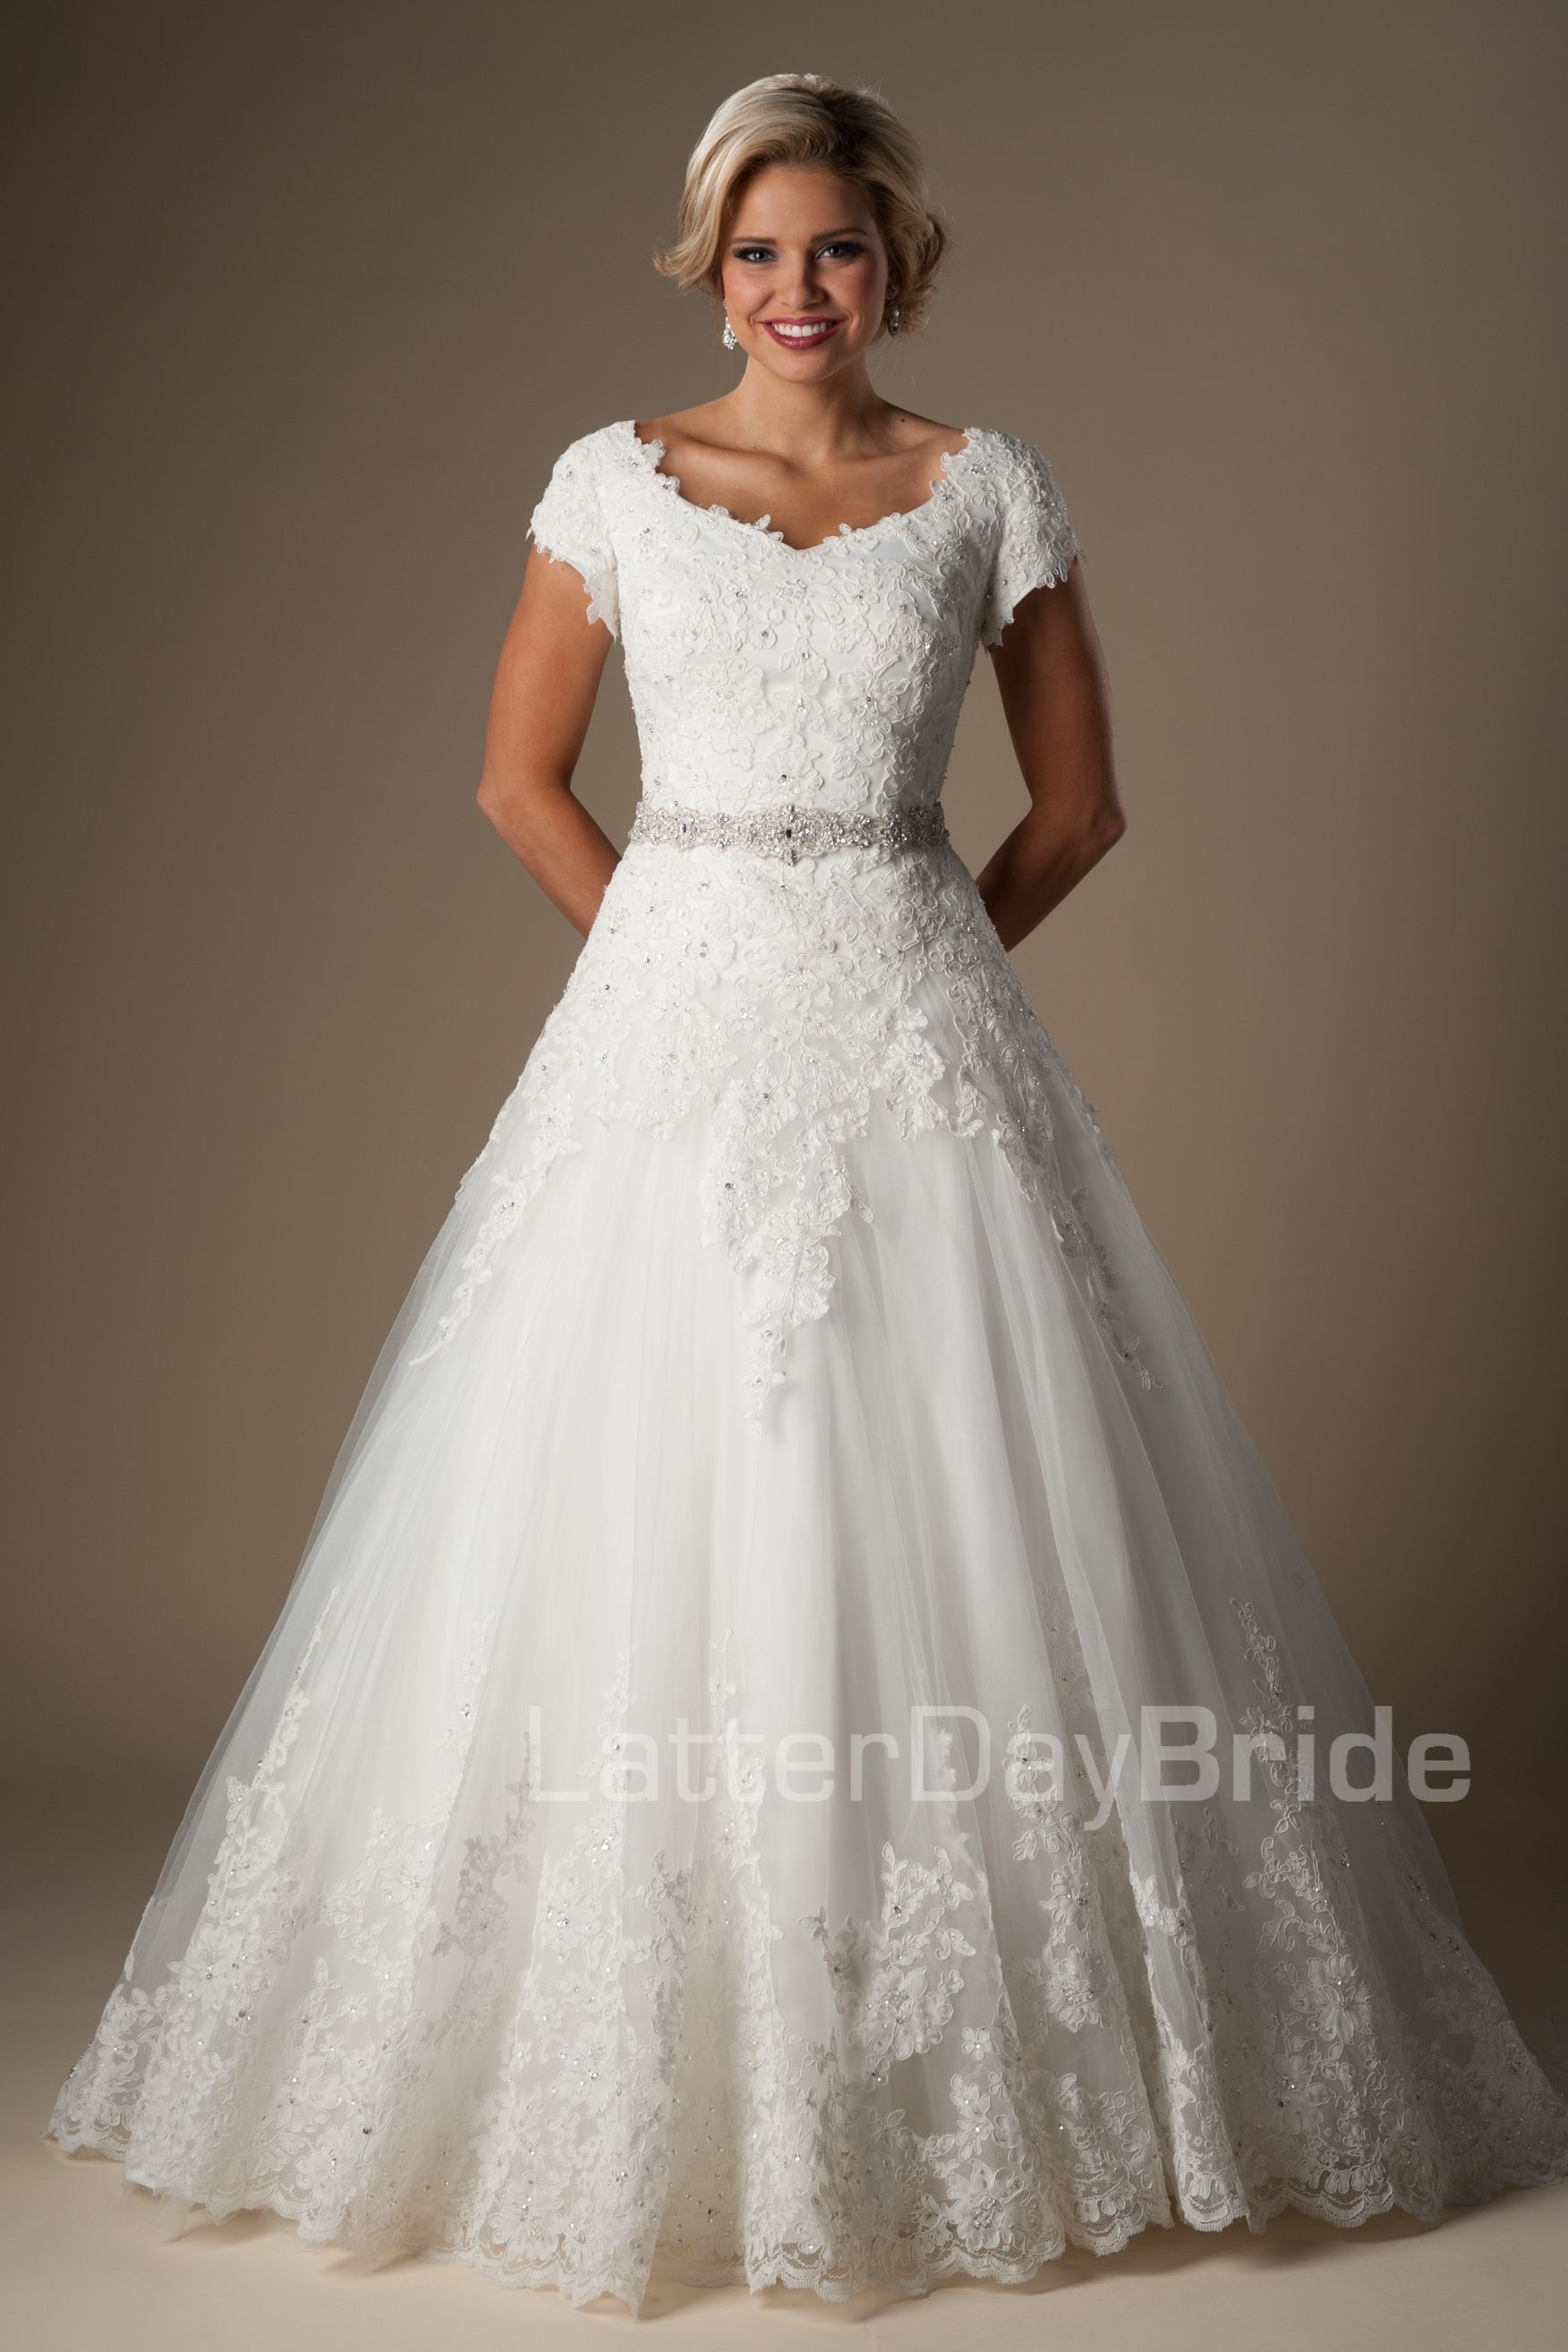 Ivory Lace Ball Gown Modest Wedding Dresses With Short Sleeves Cap ...